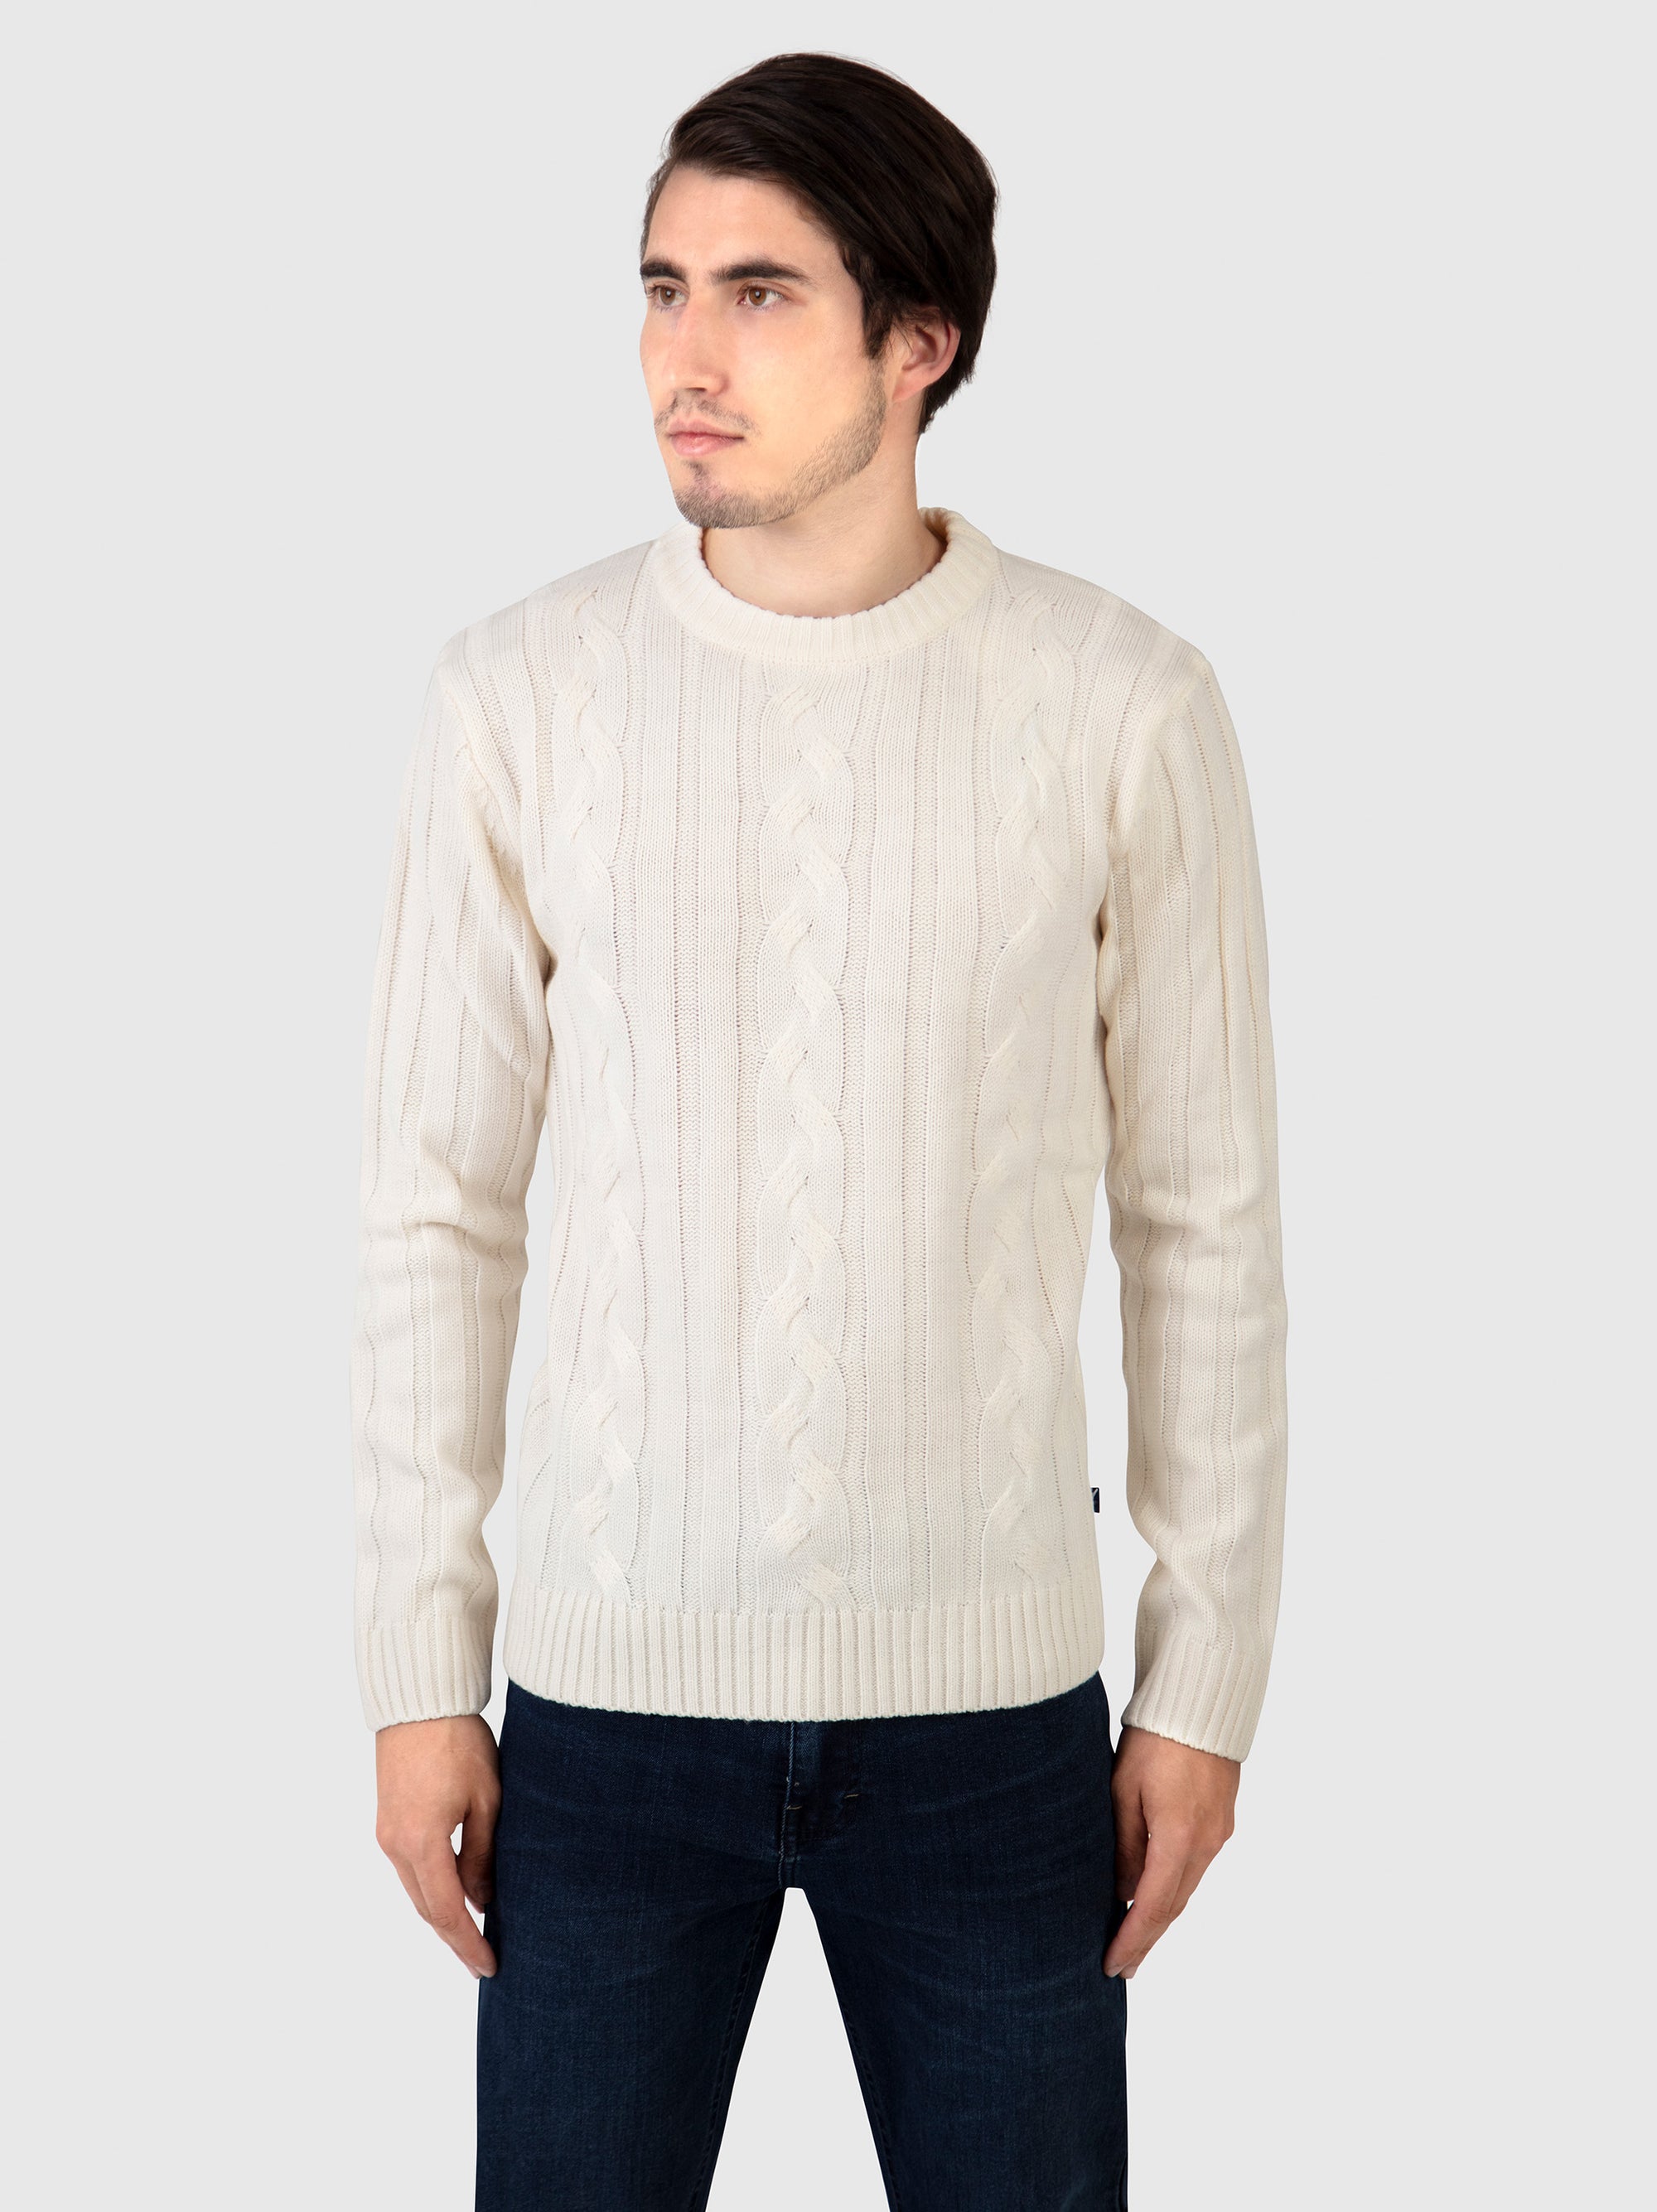 dable-winter-white-mens-long-sleeve-crew-neck-knitted-sweater-mish-mash